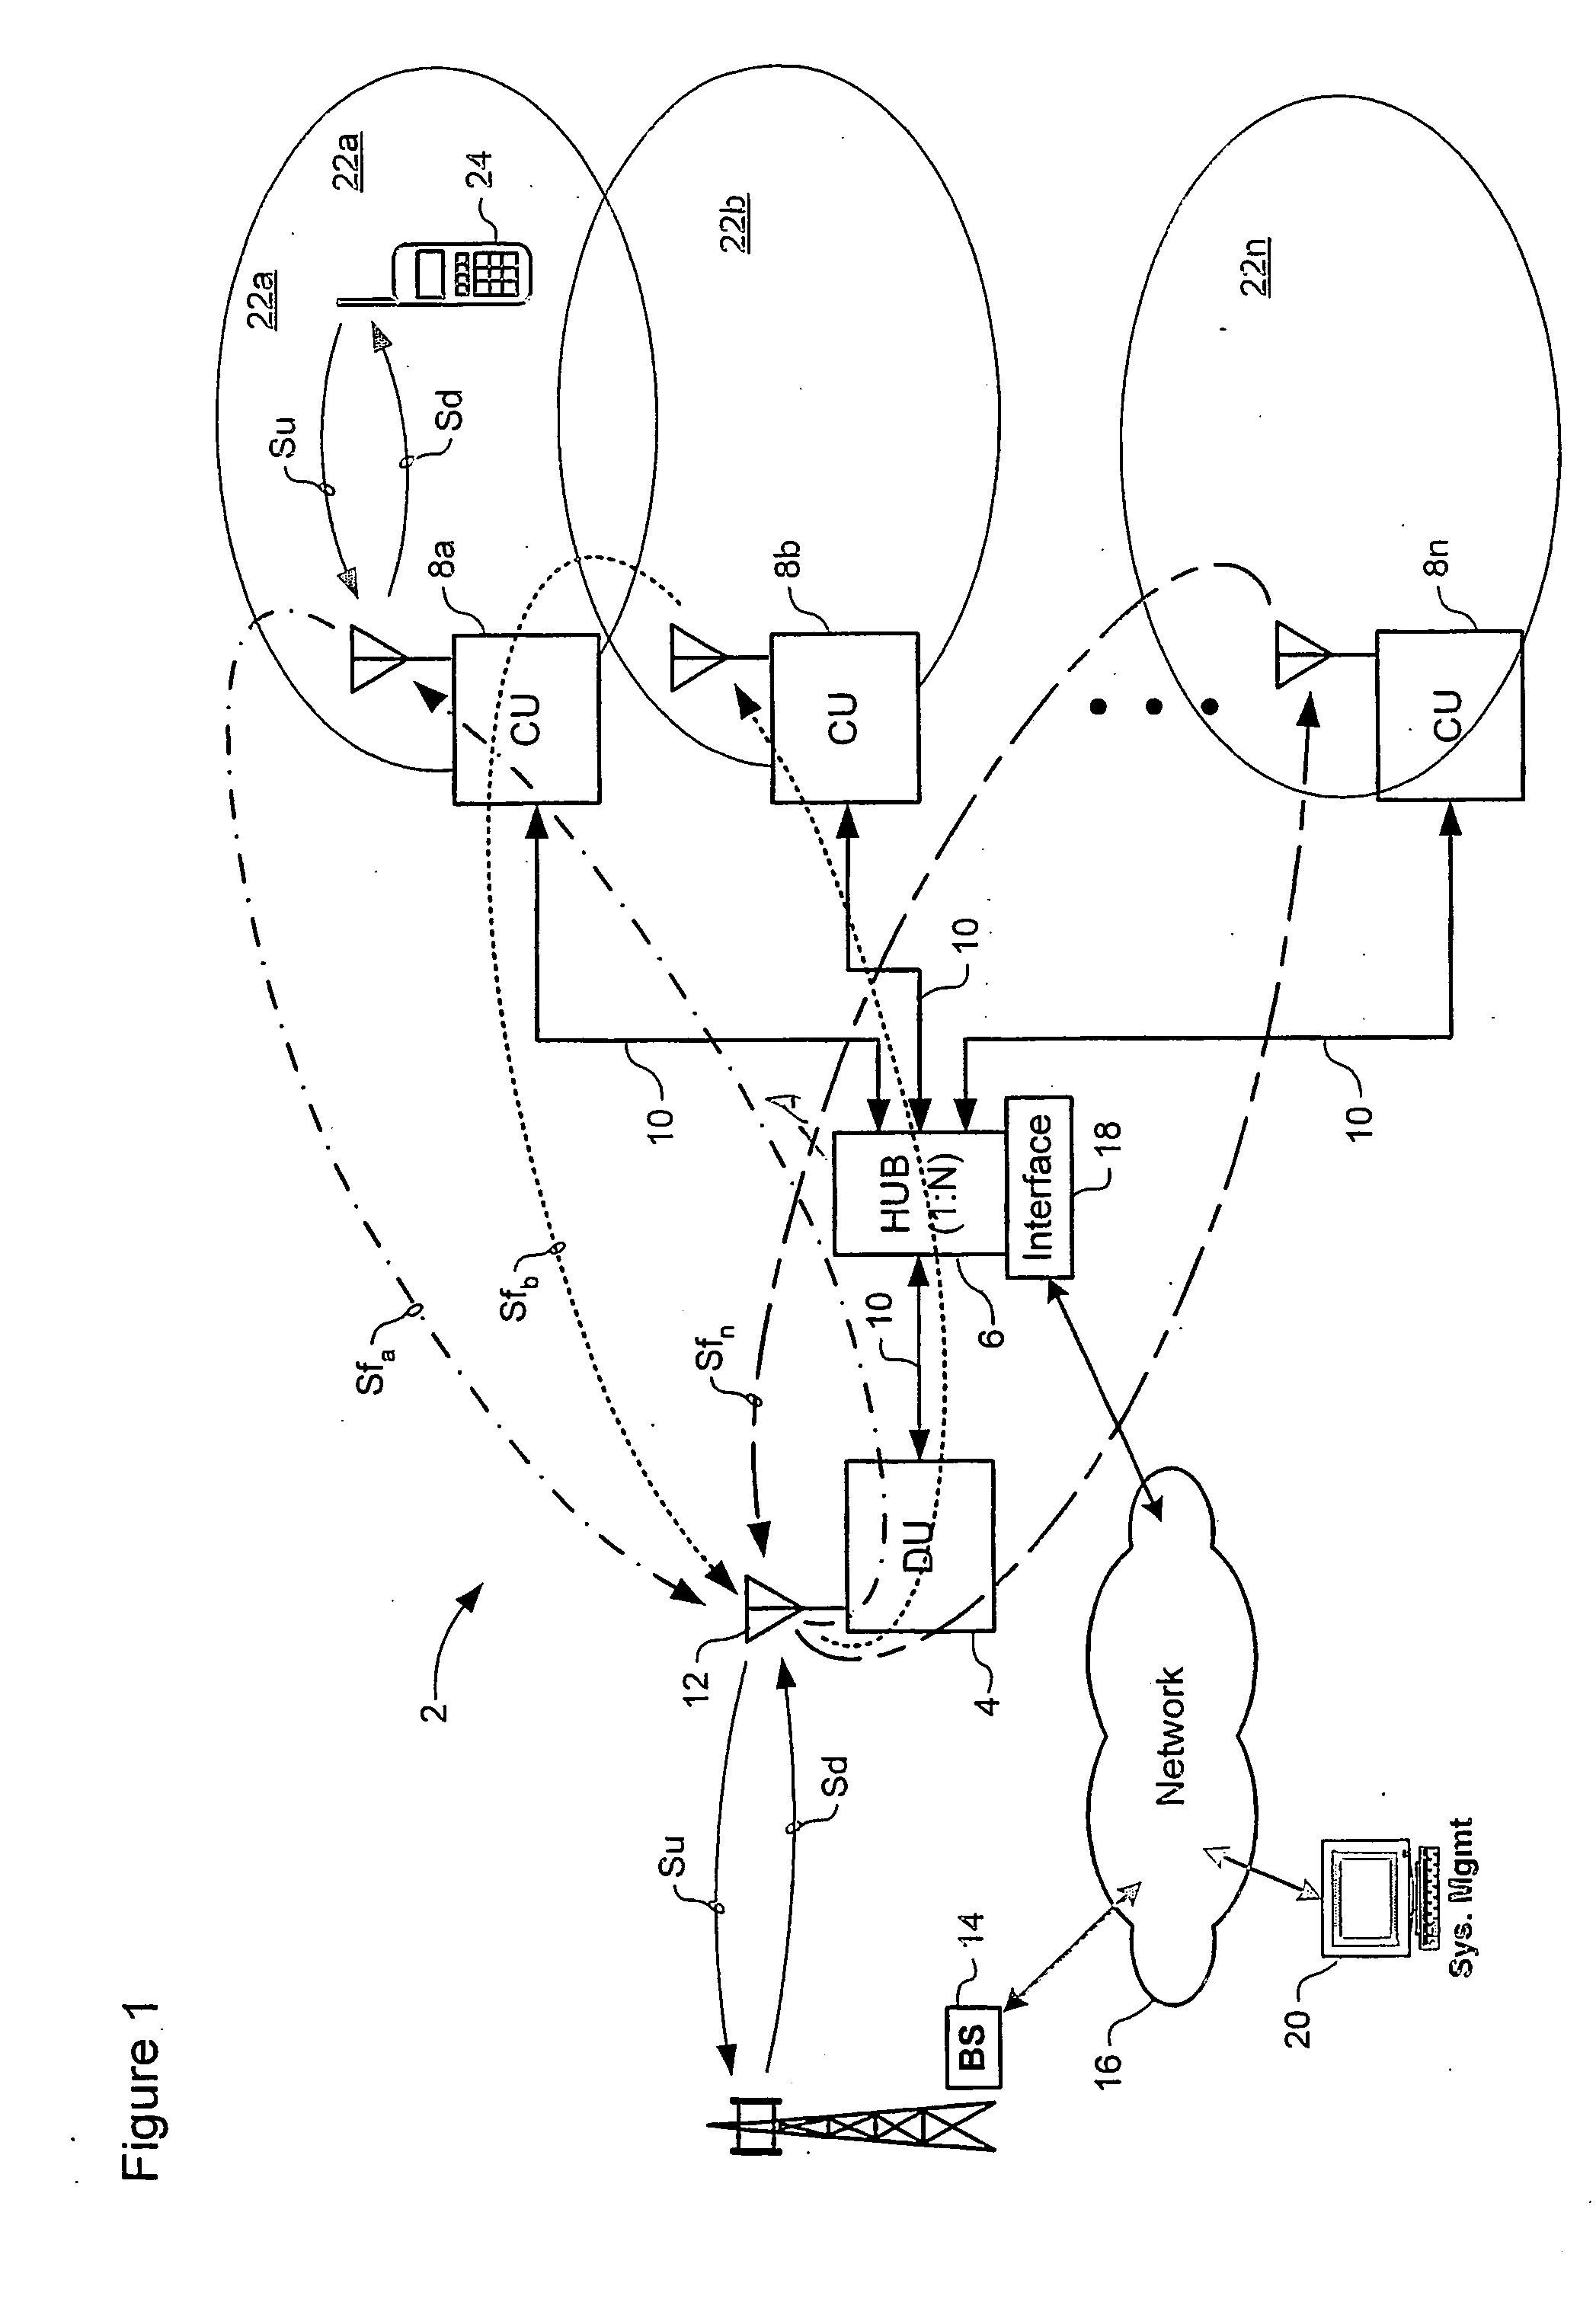 Distributed adaptive repeater system